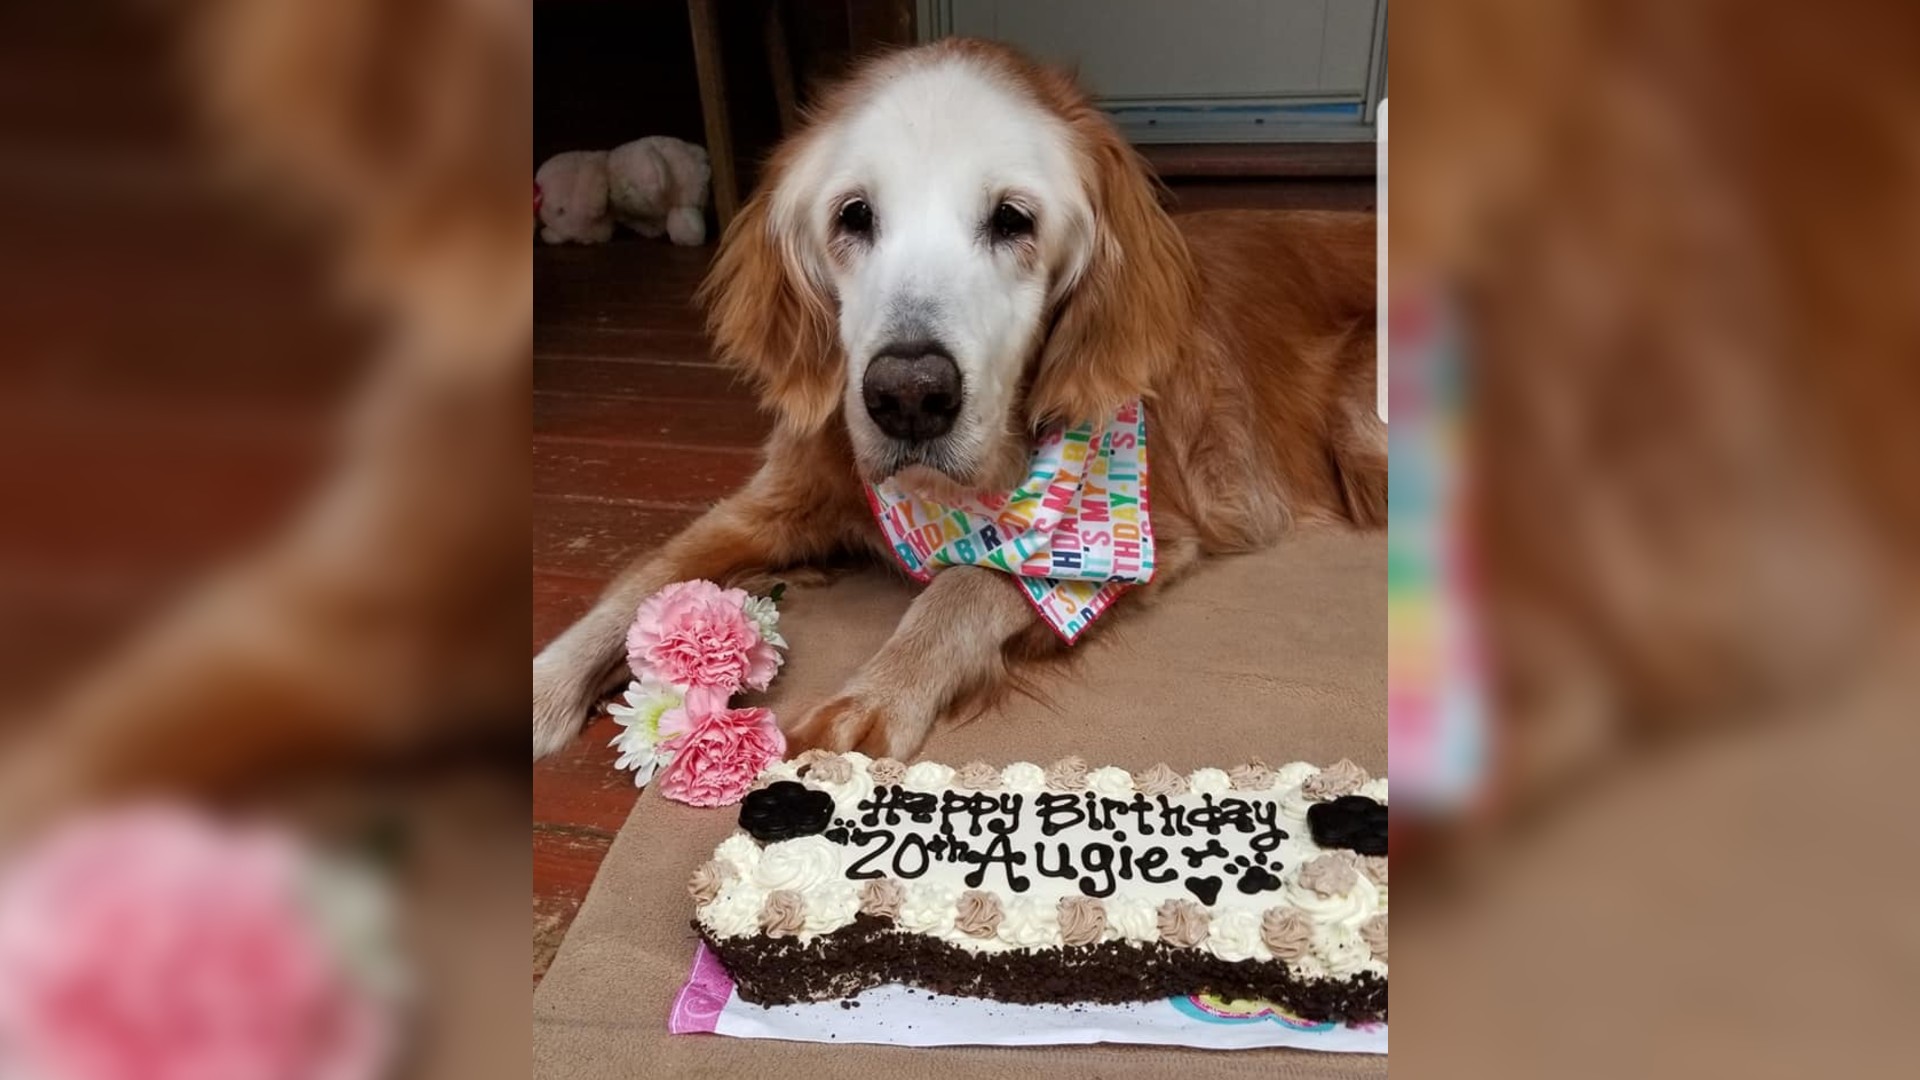 20 years in dog years